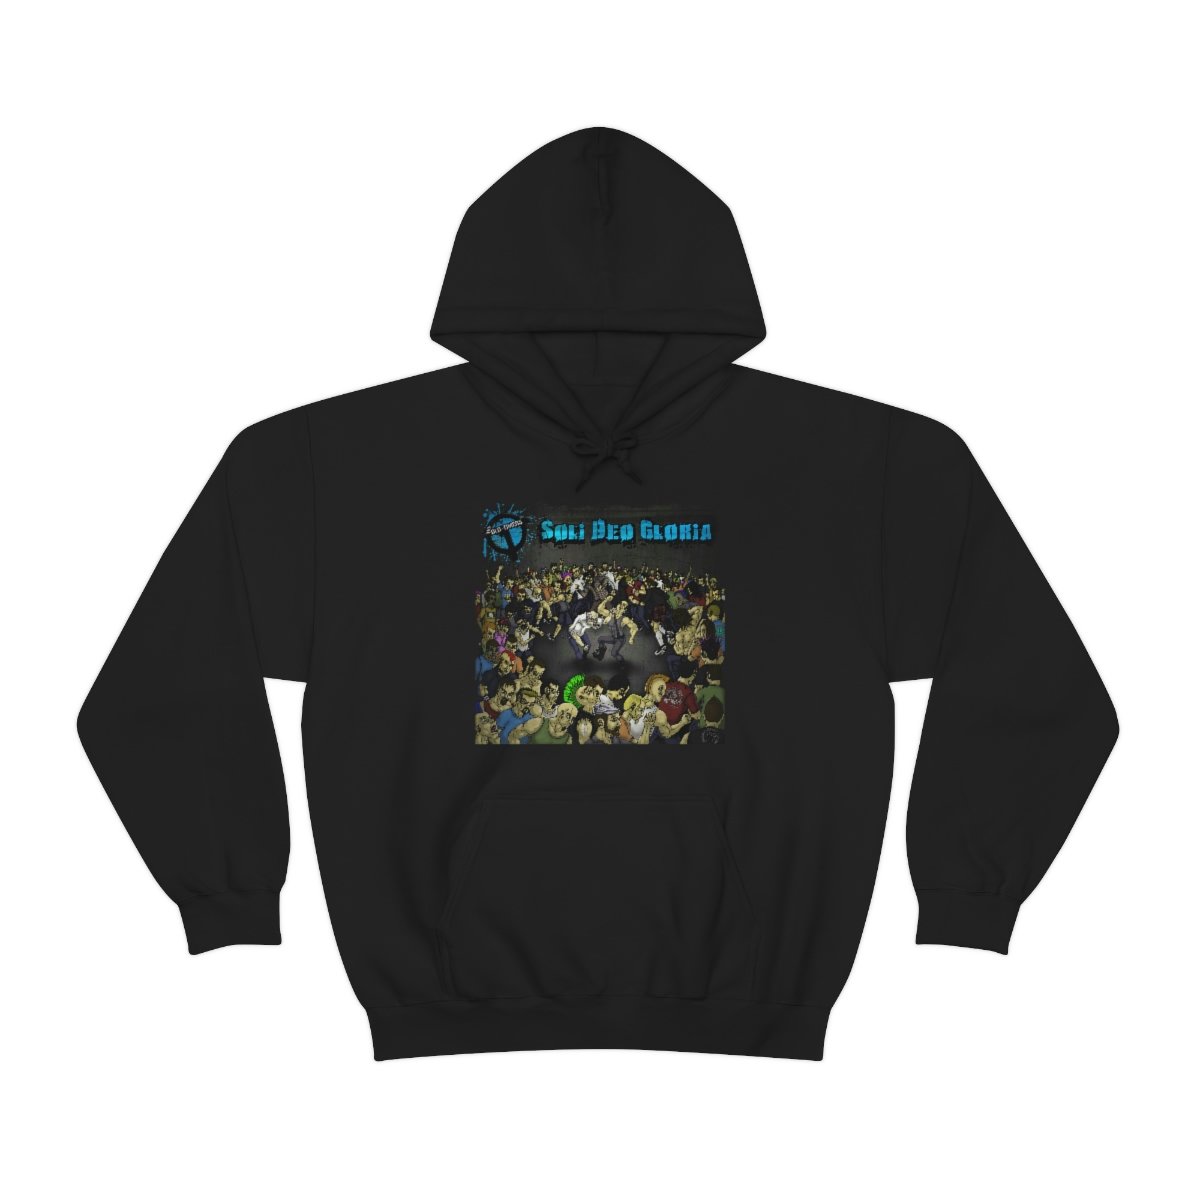 The Old Timers – Soli Deo Gloria (TPR) Pullover Hooded Sweatshirt